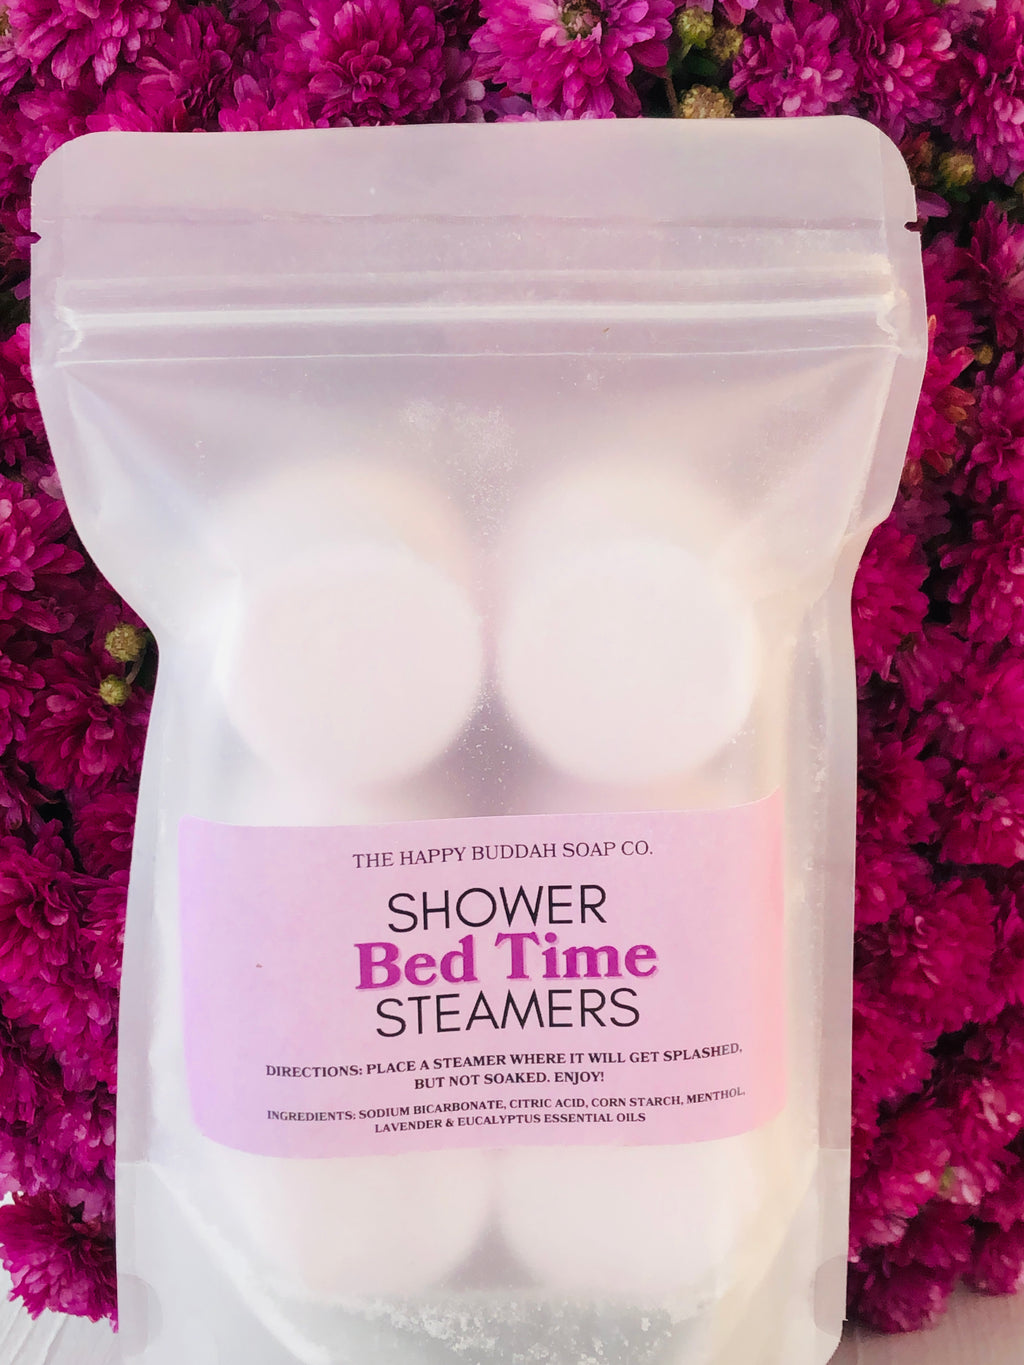 Bed time Shower Steamers by The Happy Buddah